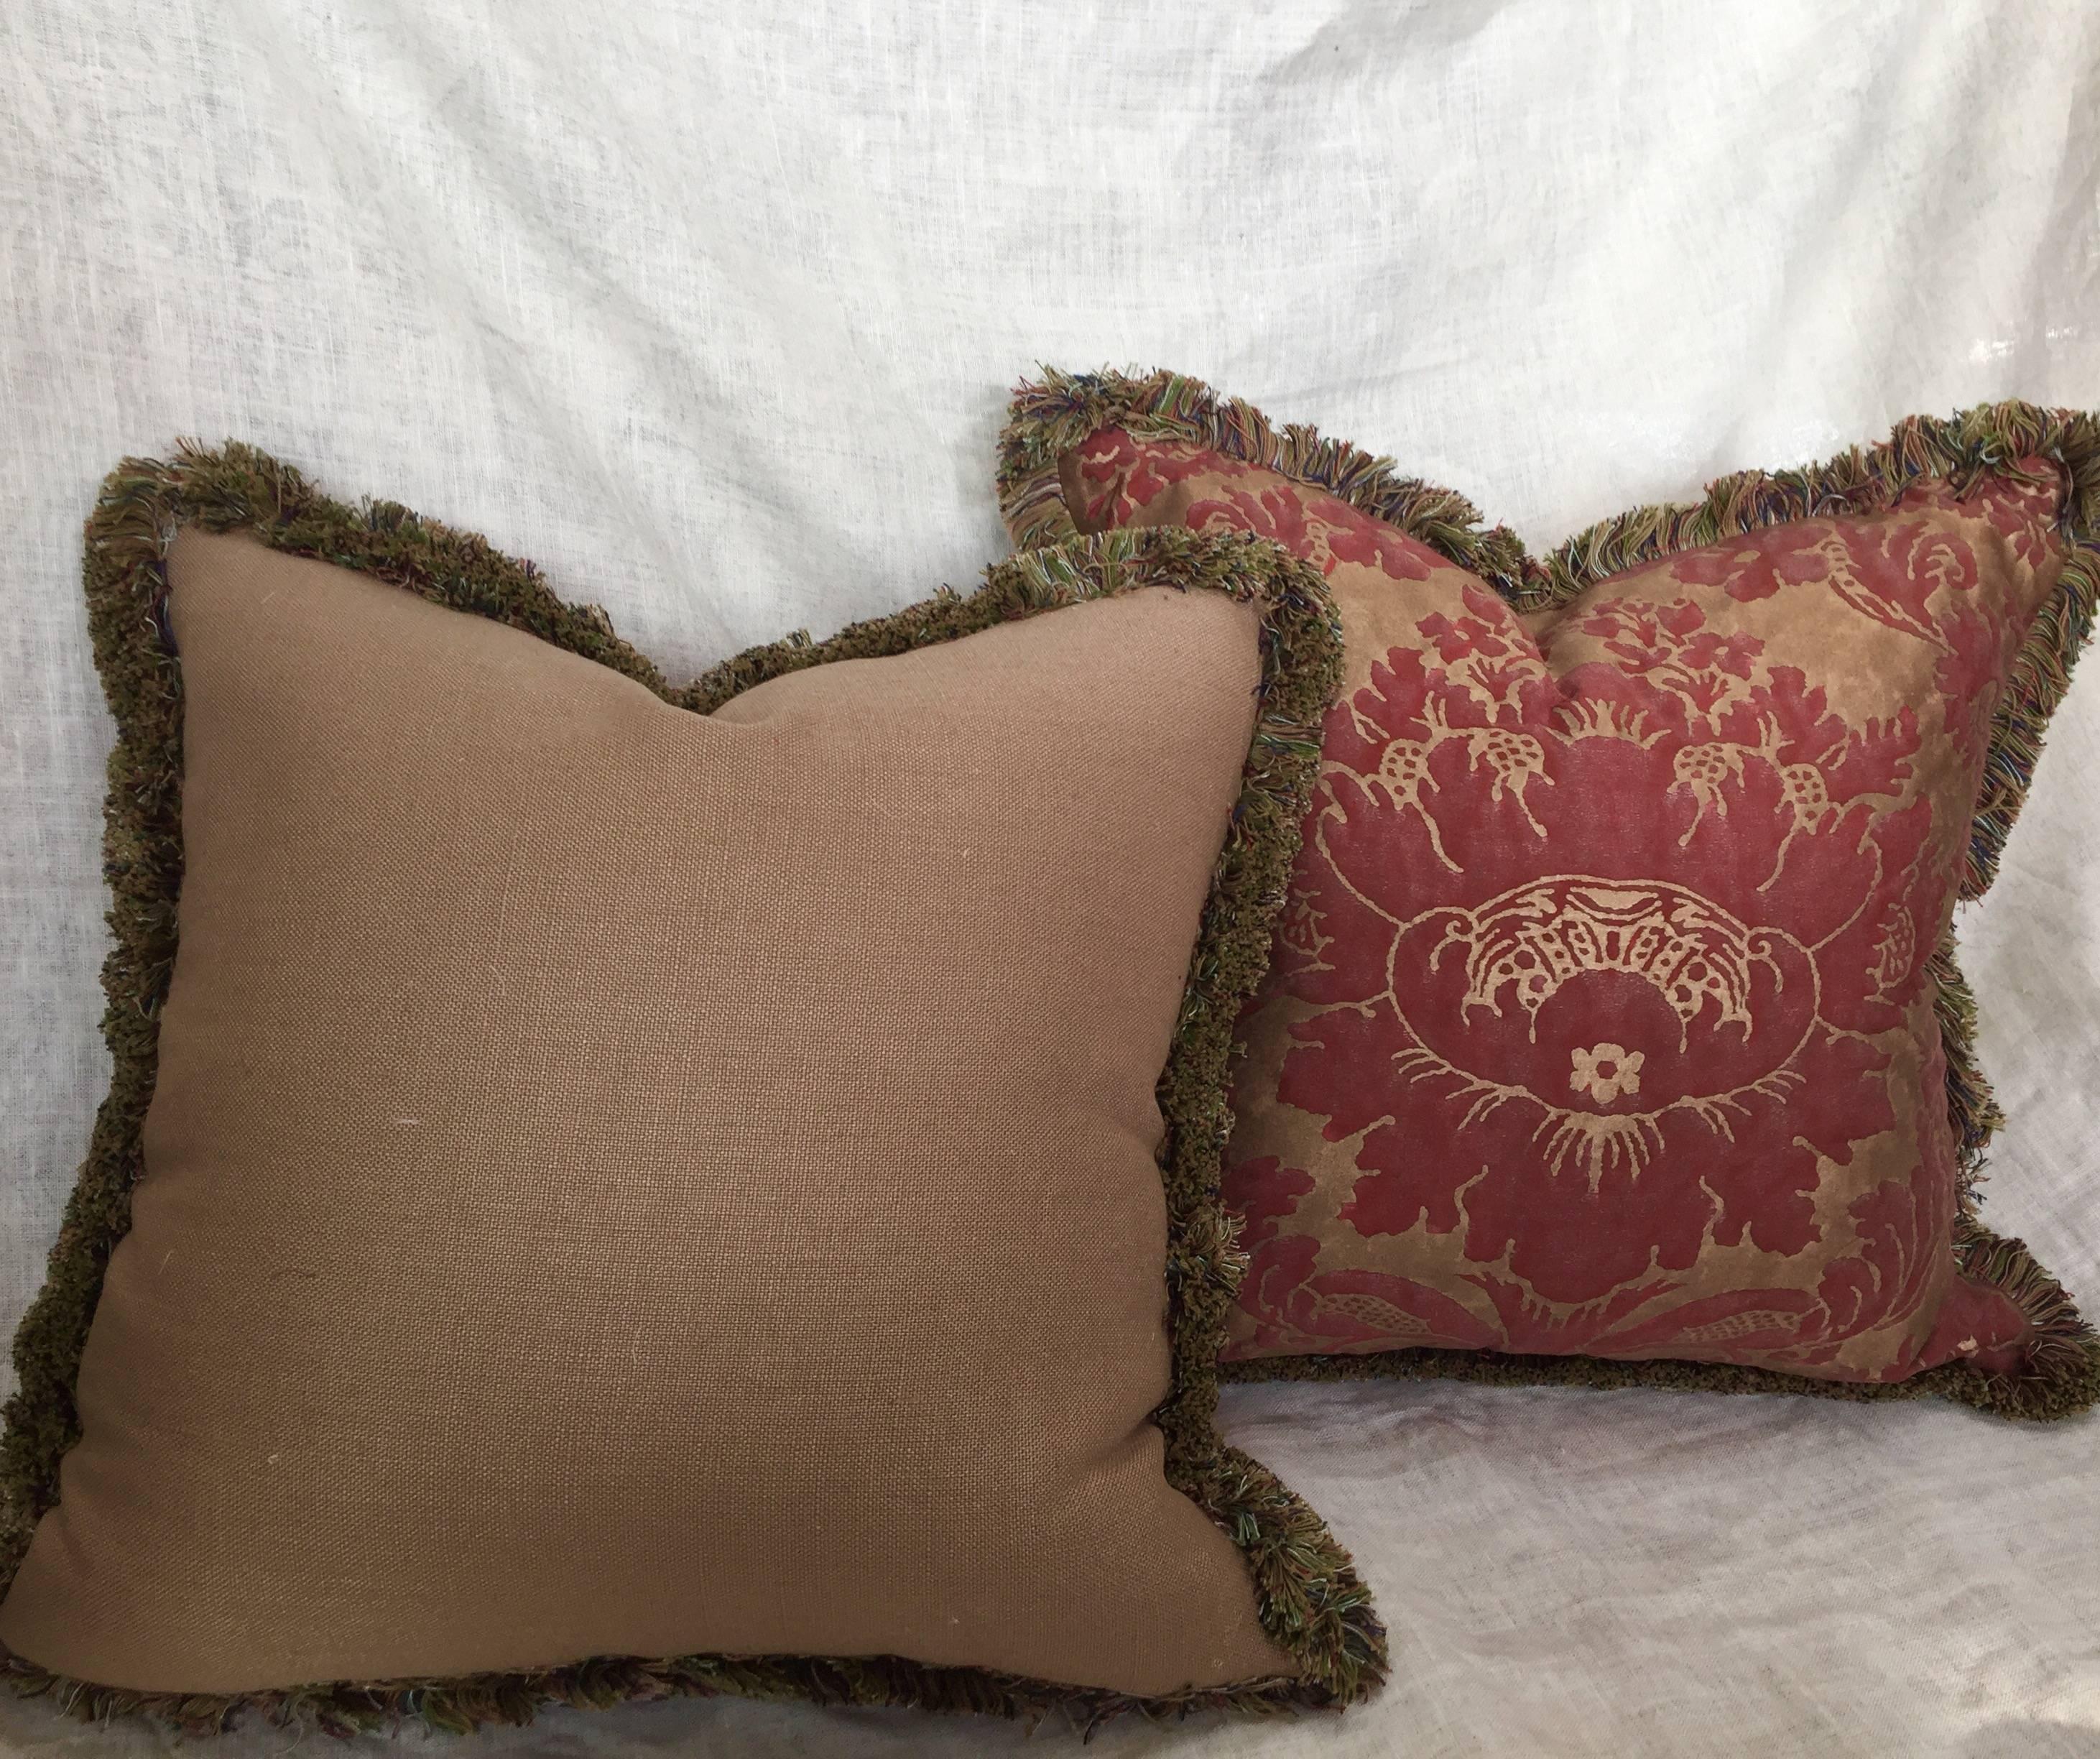 Decorative pair of red and gold Fortuny cushions with multicolored brush fringe.